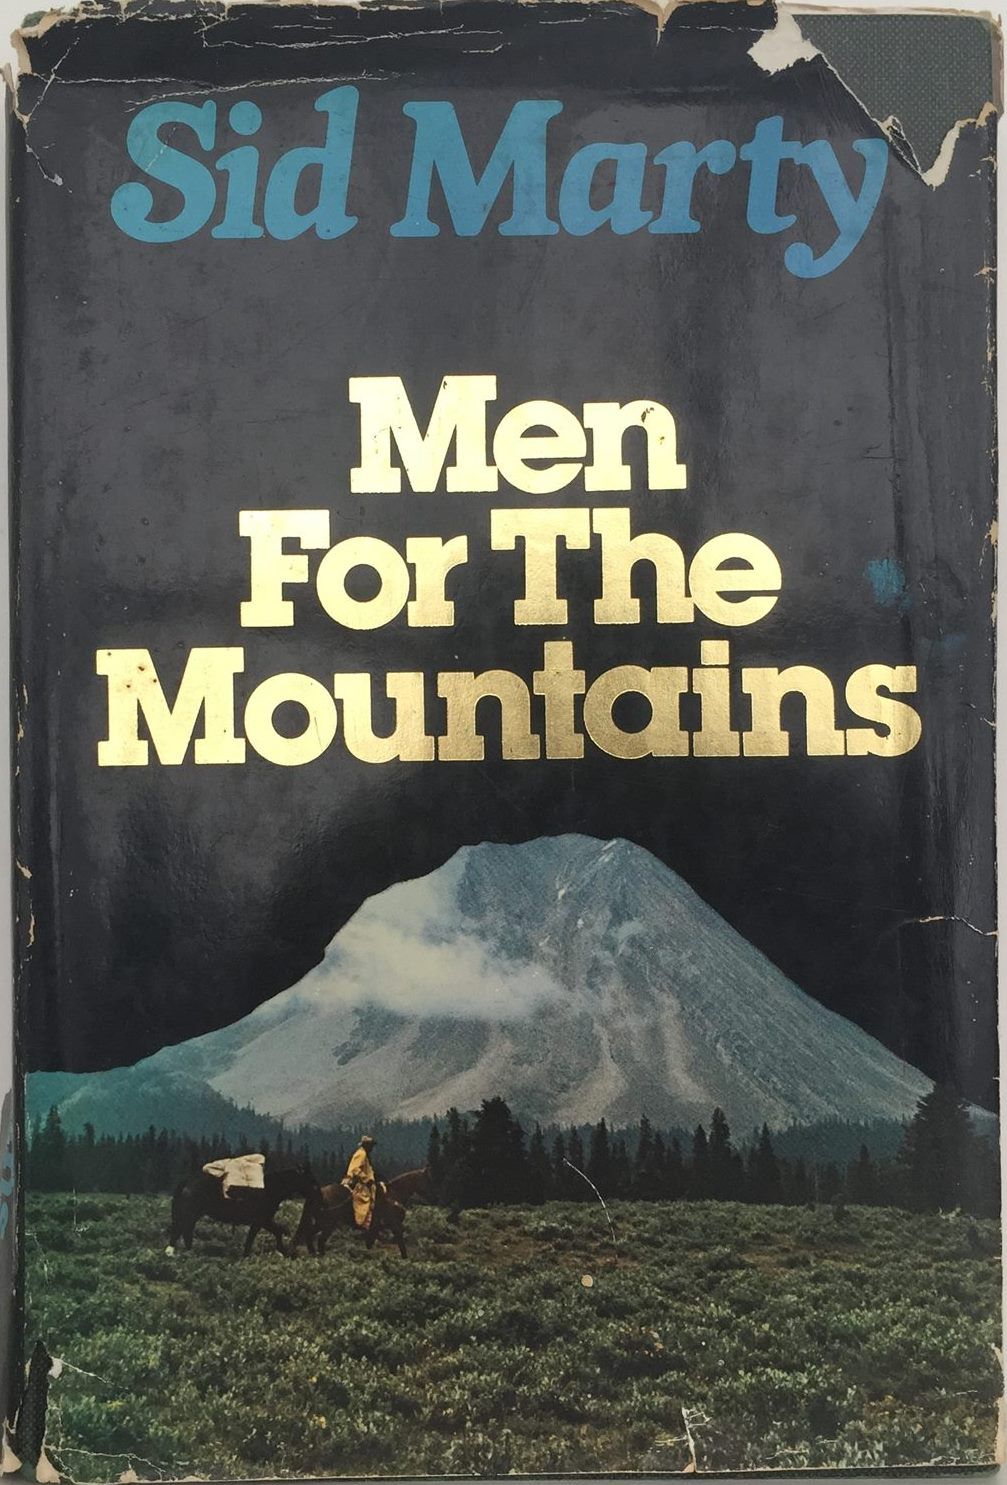 MEN FOR THE MOUNTAINS